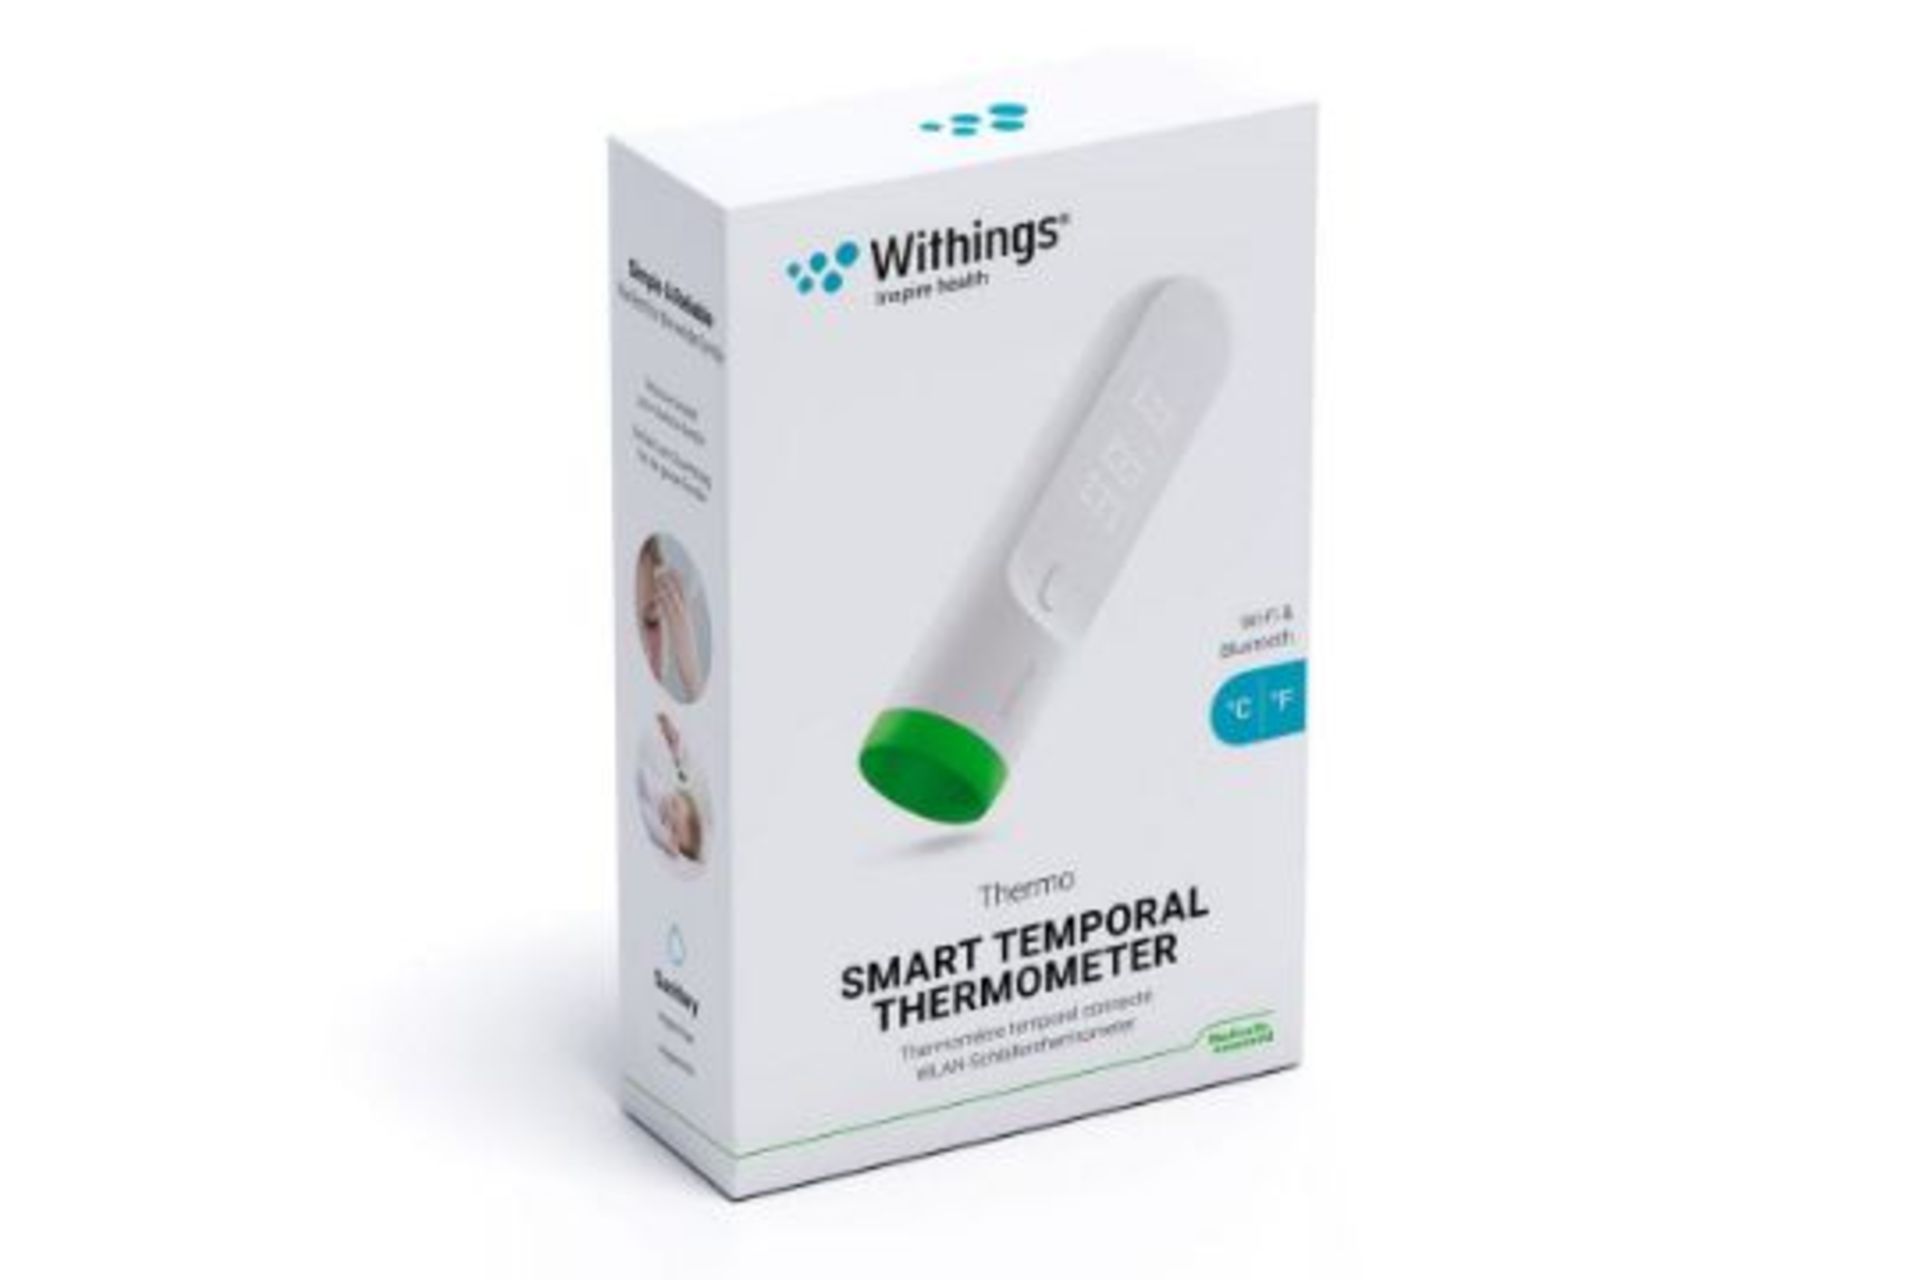 NEW & BOXED Withings Thermo - Smart Temporal Thermometer. RRP £89.95 EACH. Thermo is a game changer.